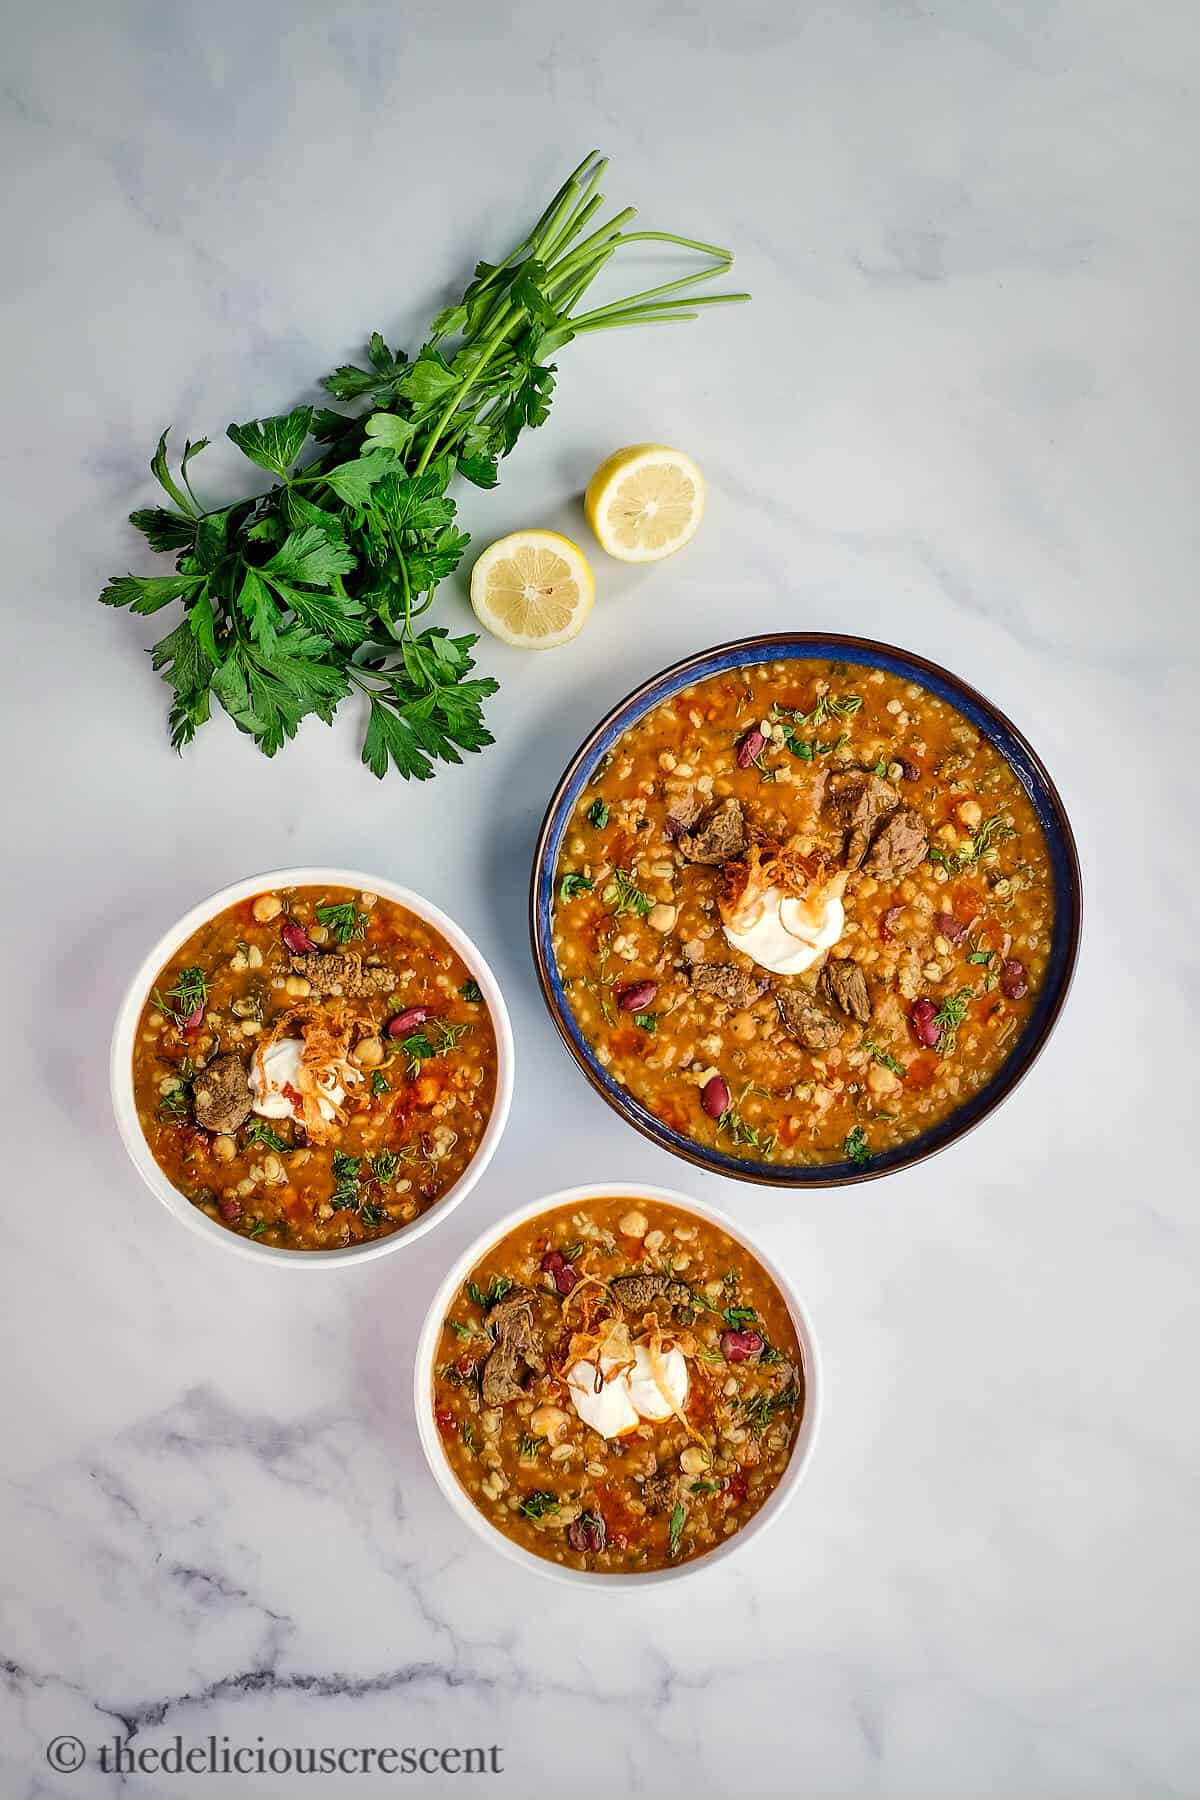 Three bowls full of a hearty Persian style soup.